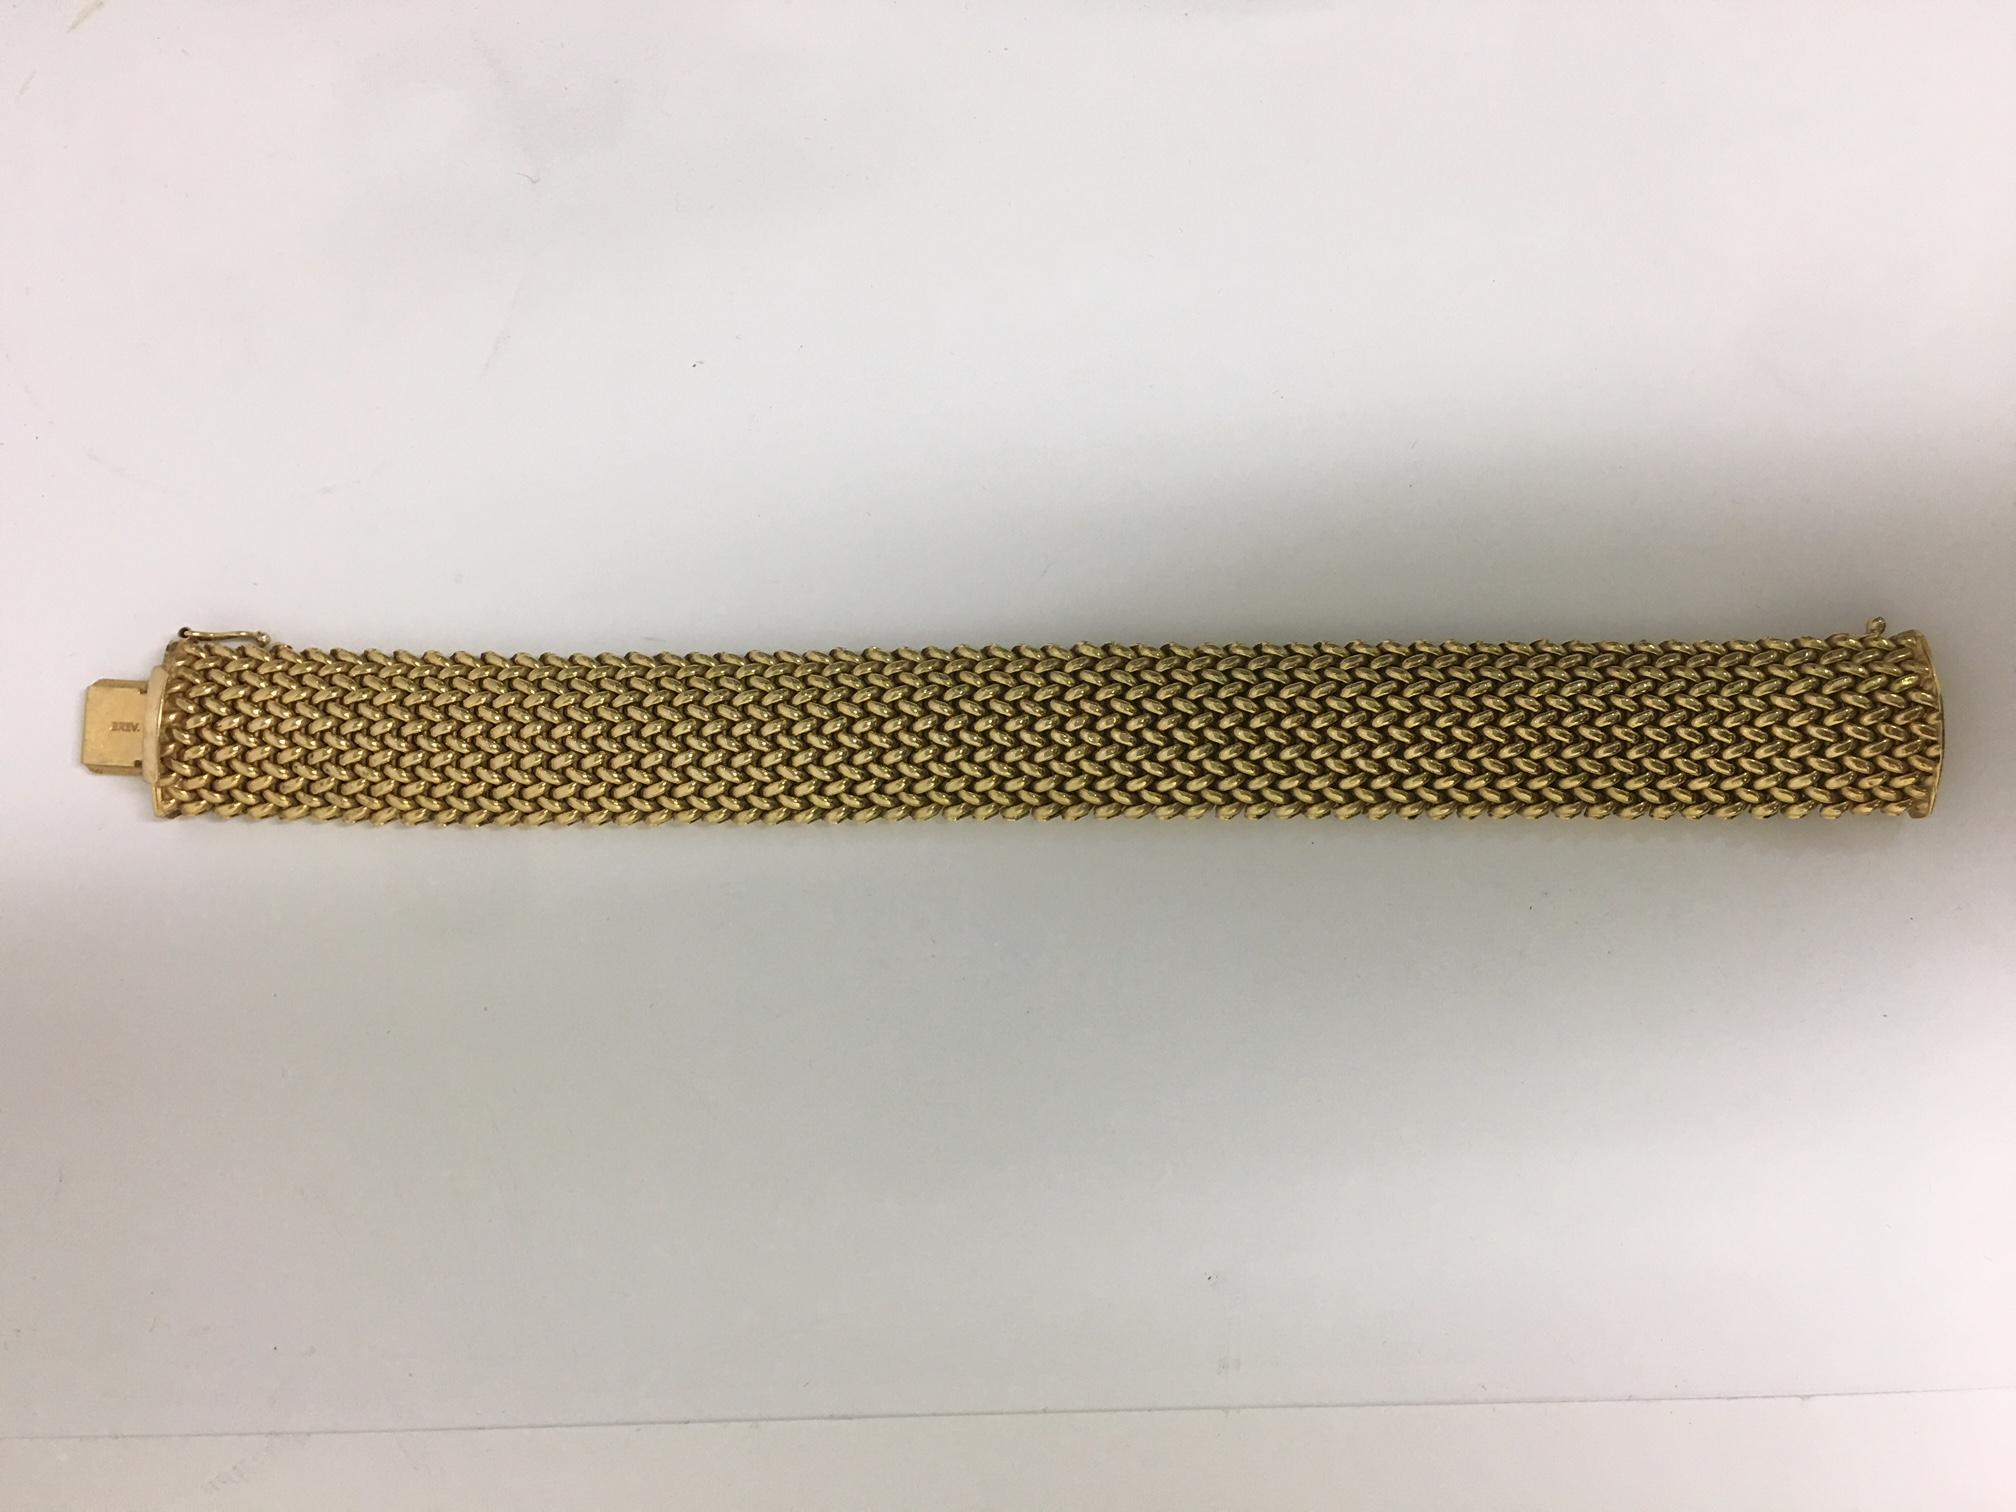 Italian handmade yellow gold mesh bracelet is in perfect condition vey flexible and well kept,
Bracelet is 8 Inches long (20.32 Centimeter) 